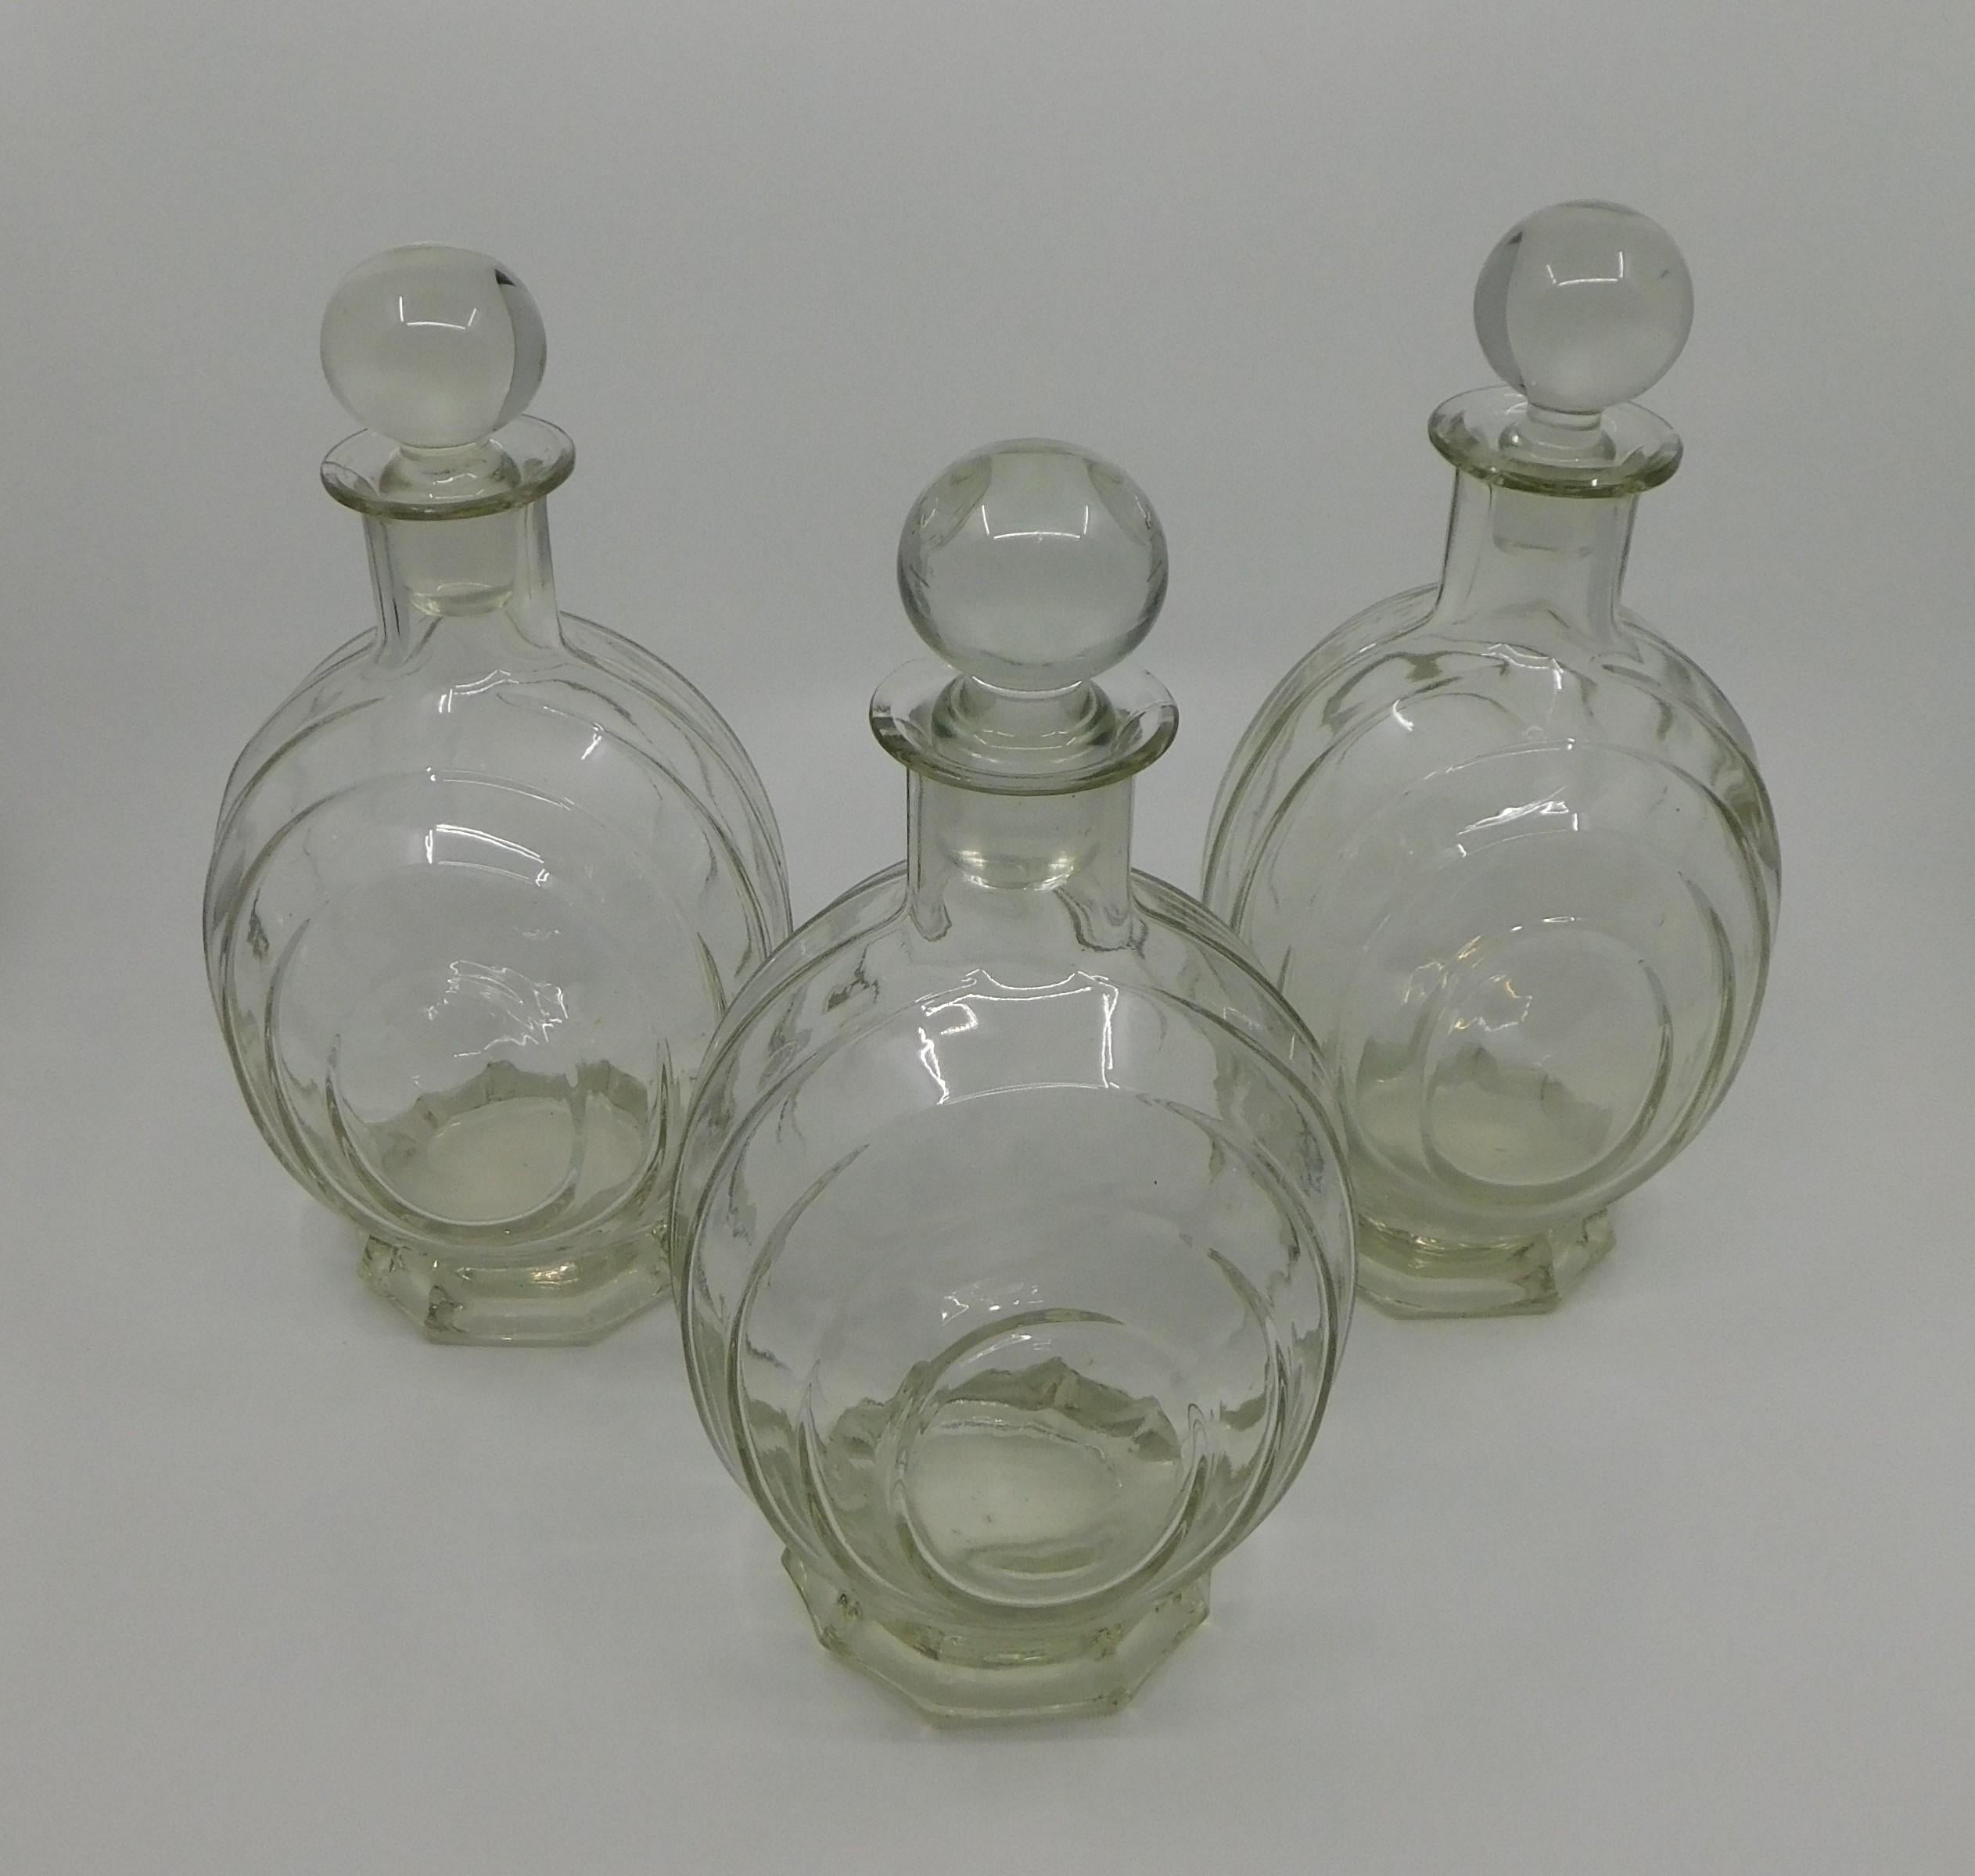 Set of four three circa 1930 clear glass liquor decanter bottles with clear original stopper tops.